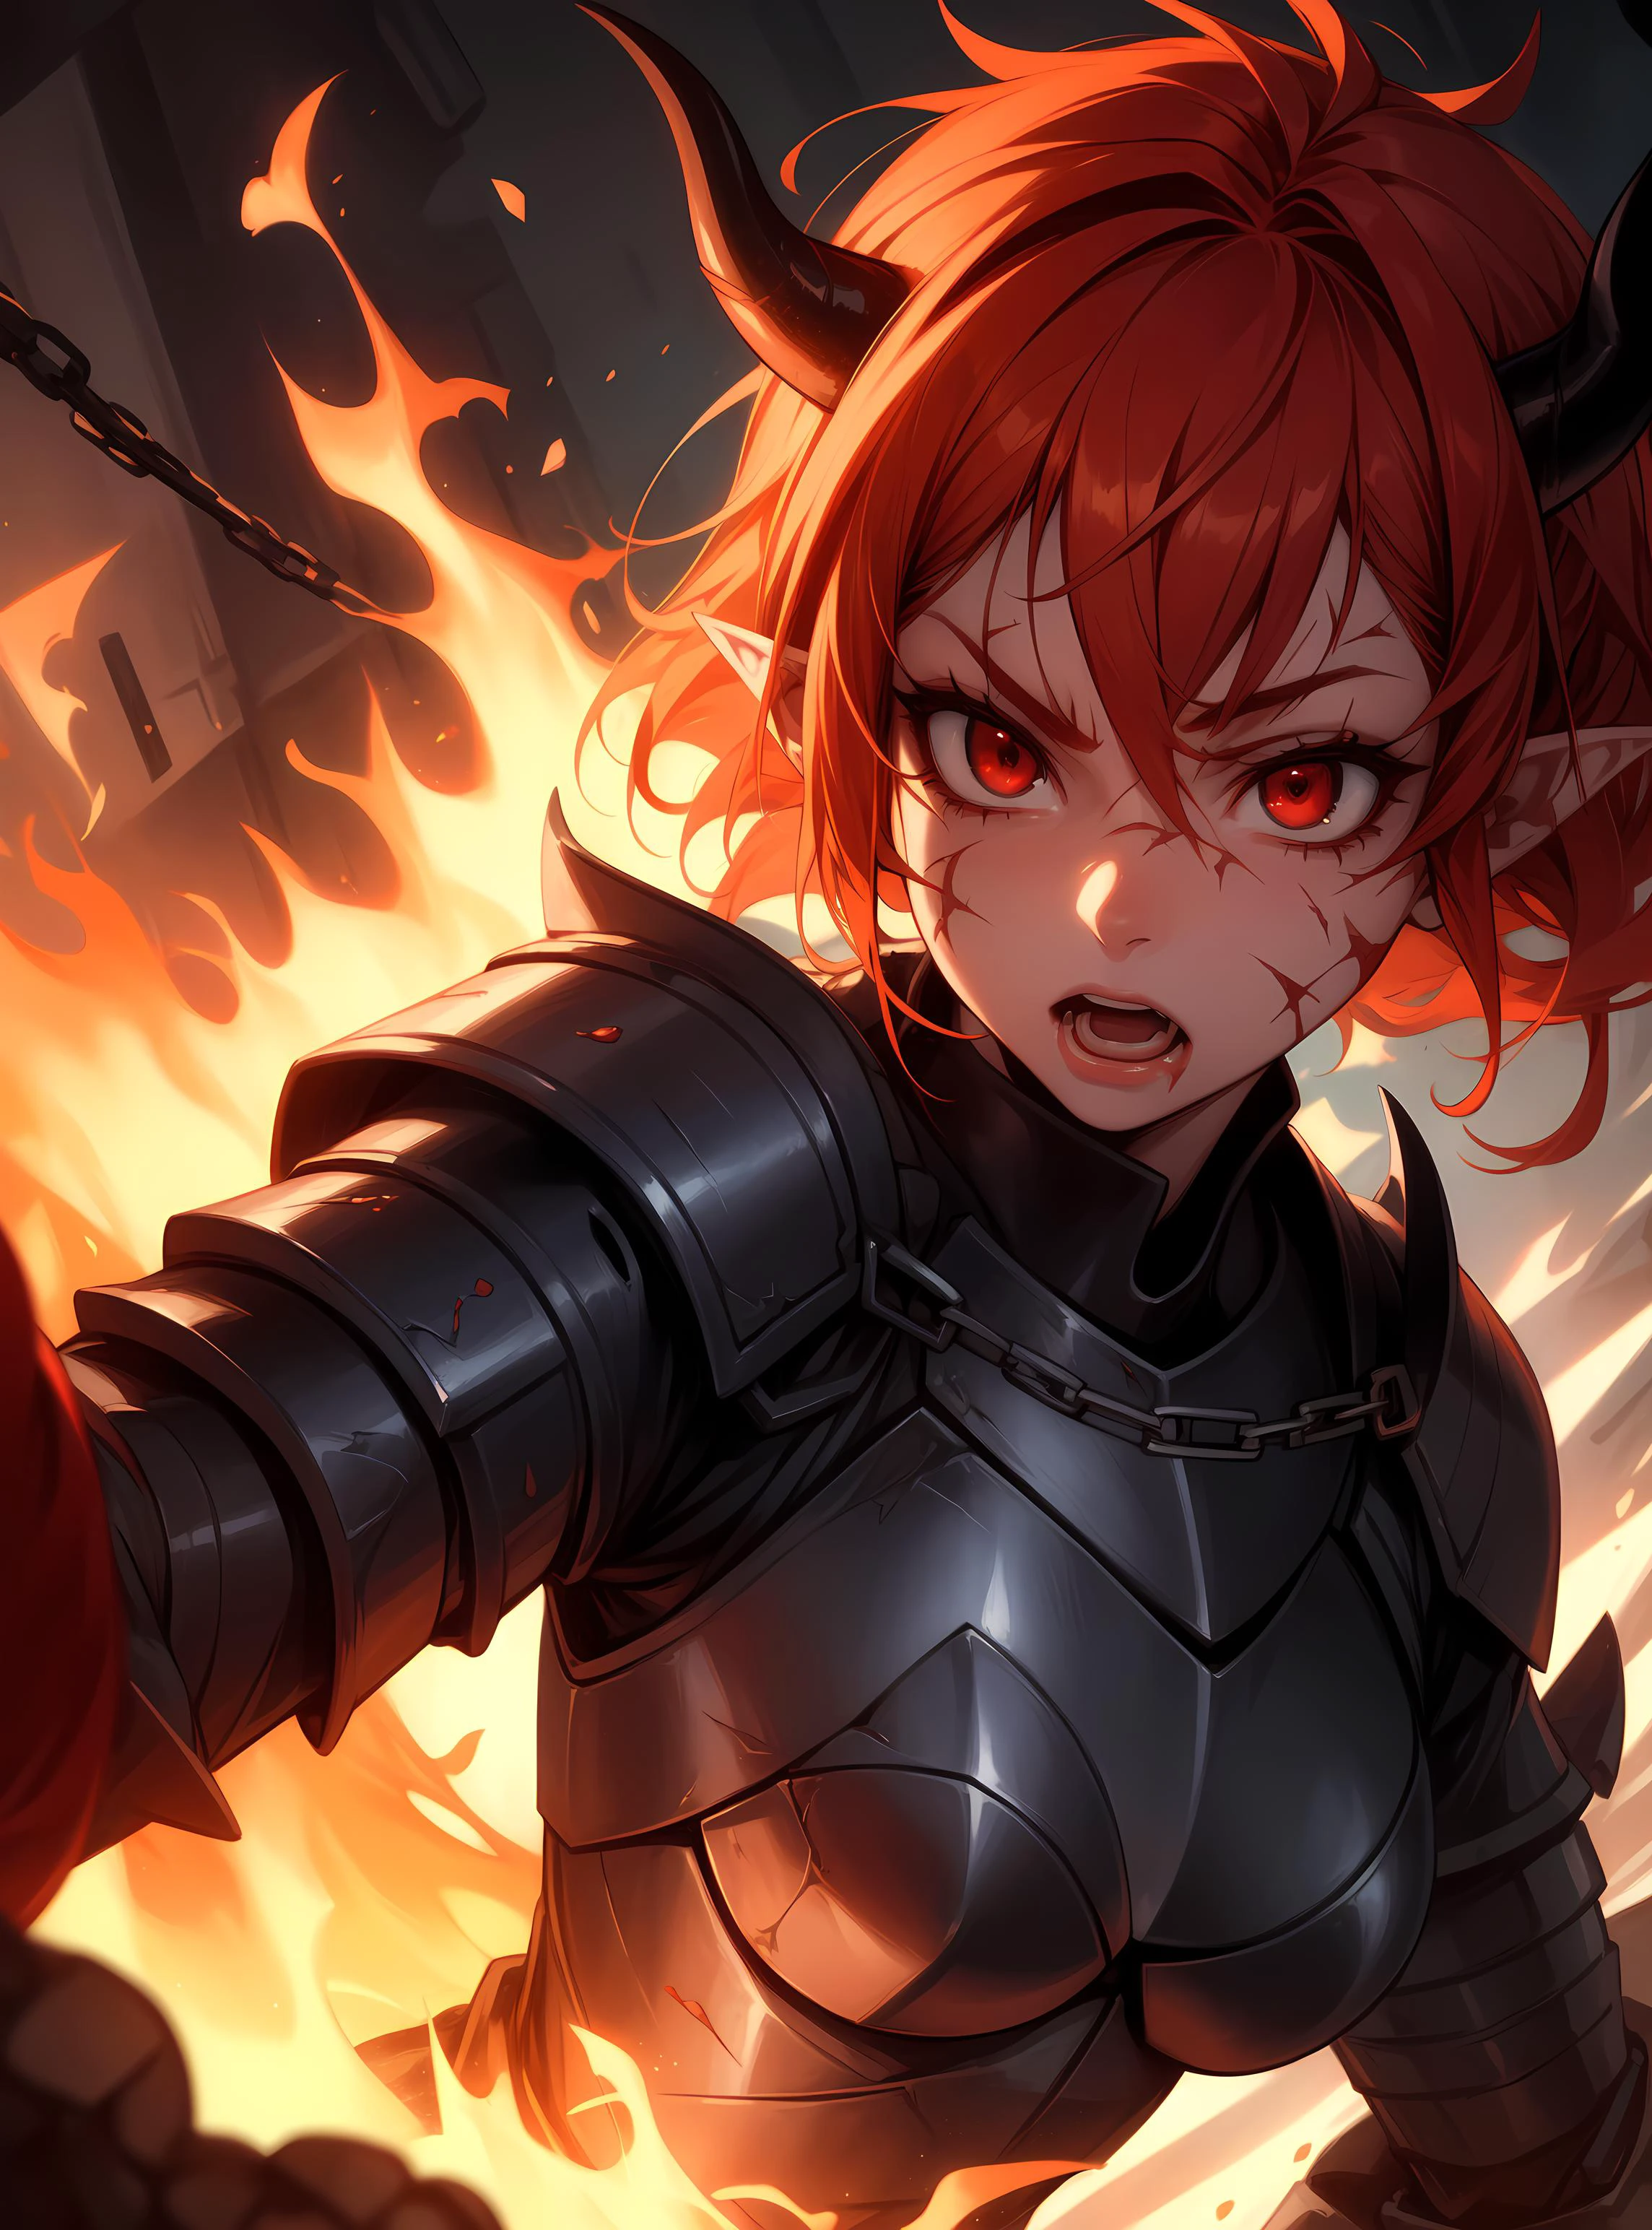 beautiful, (masterpiece), best quality, (extremely detailed face), extremely detailed eyes, perfect lighting, detailed, deep skin, textured skin, demon, succubus, samurai armor, horns, red hair, pointy ears, chains, armor, lava, fire, red eyes, fighting stance, rage, scars